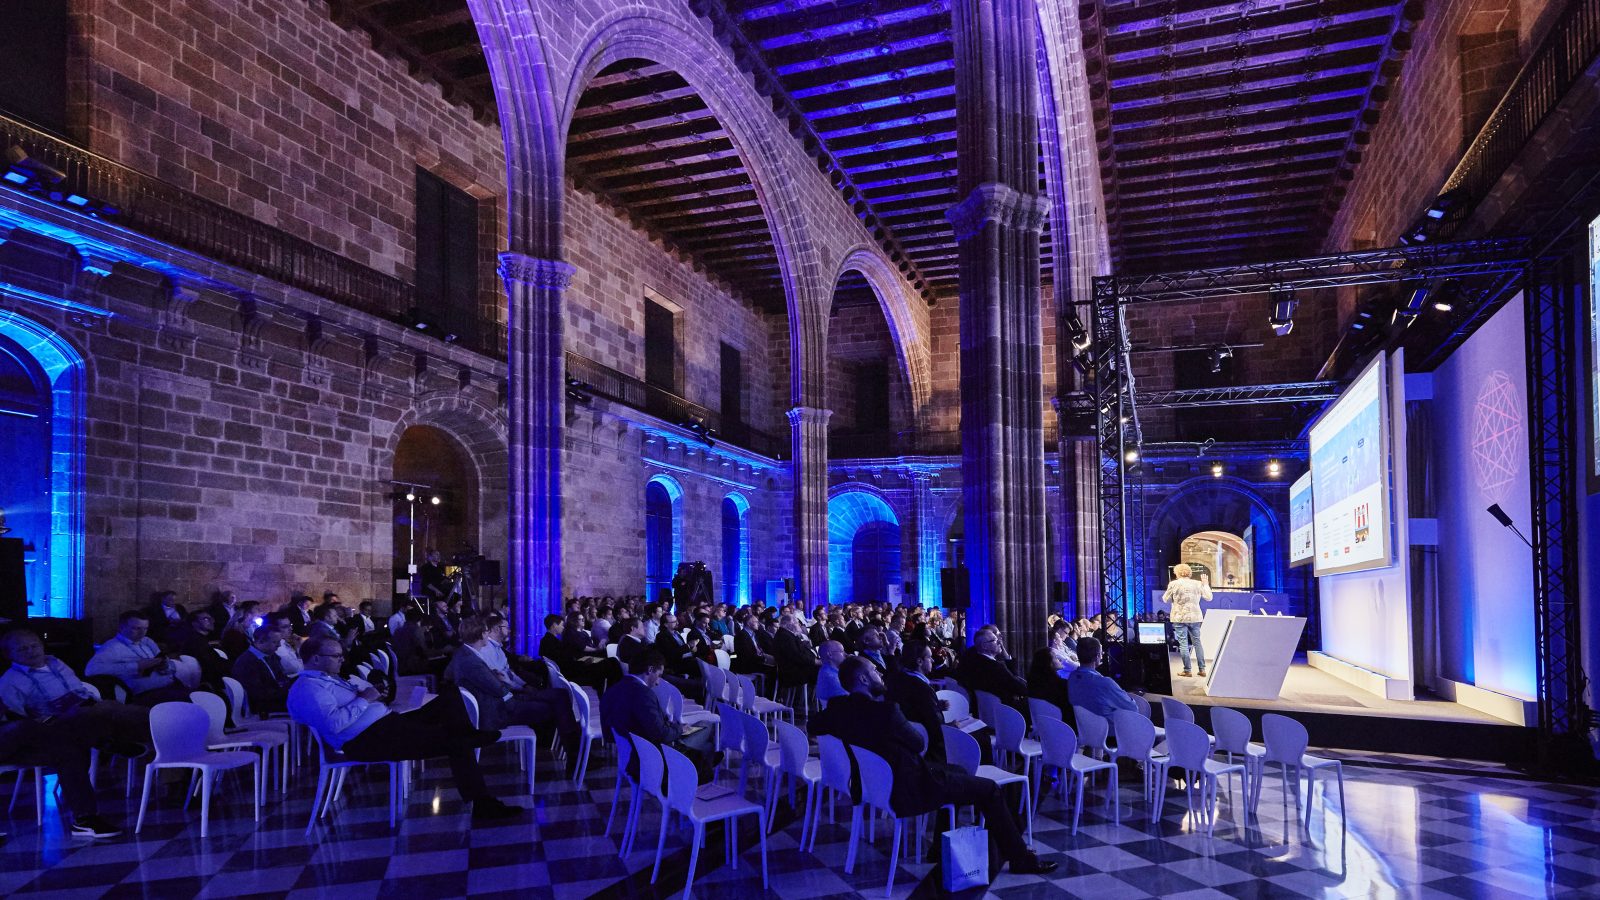 Conference venue from Barcelona with columns and full stage setup